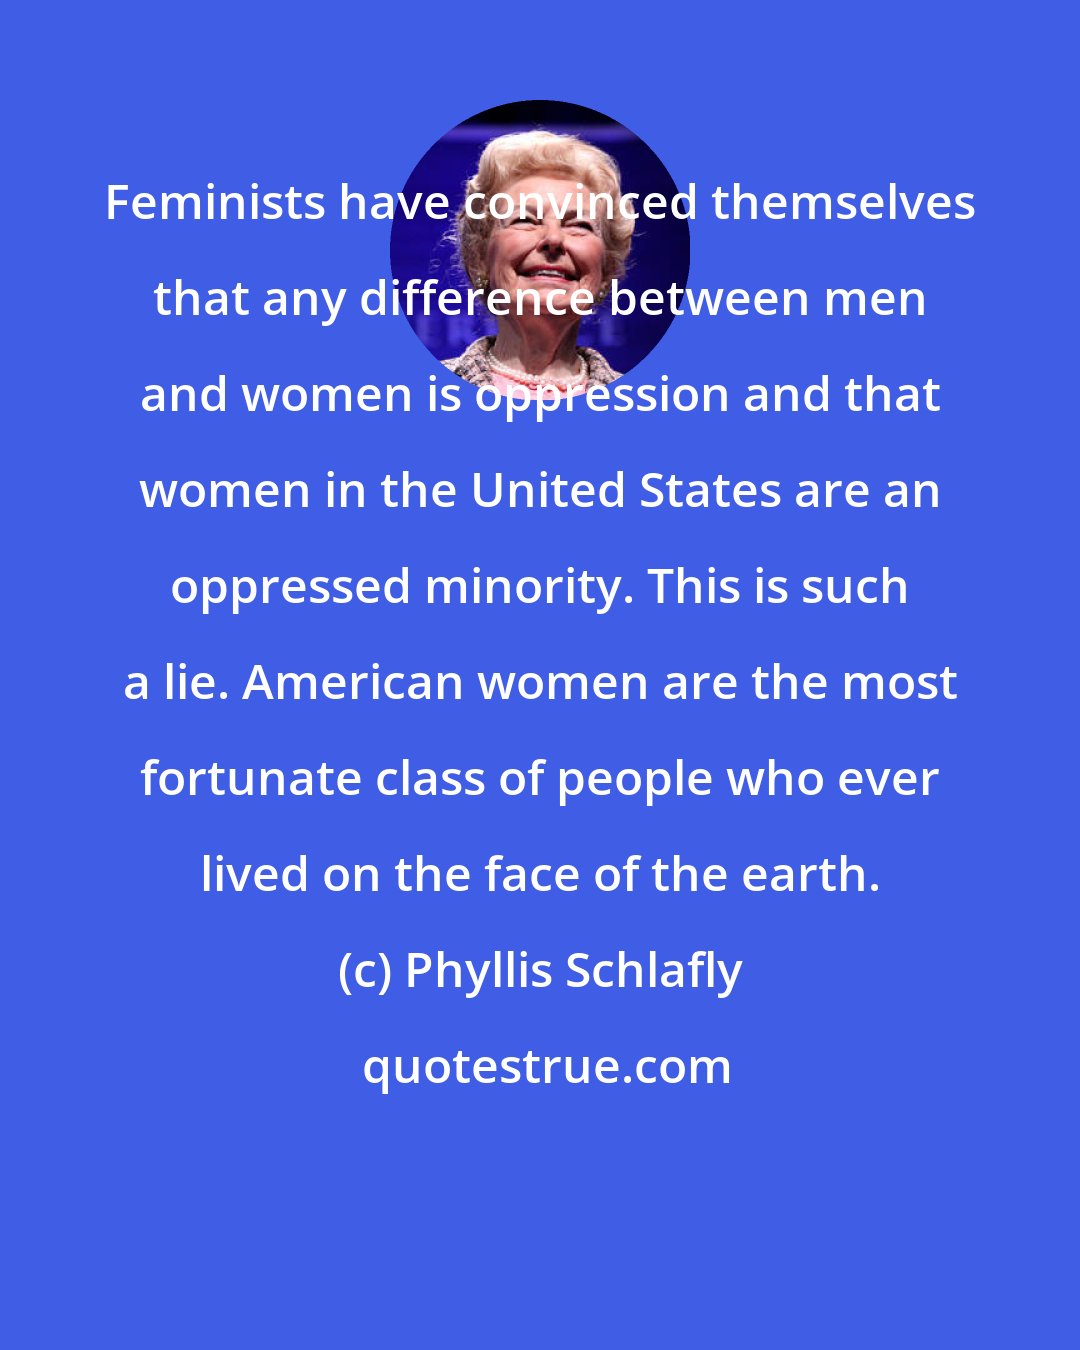 Phyllis Schlafly: Feminists have convinced themselves that any difference between men and women is oppression and that women in the United States are an oppressed minority. This is such a lie. American women are the most fortunate class of people who ever lived on the face of the earth.